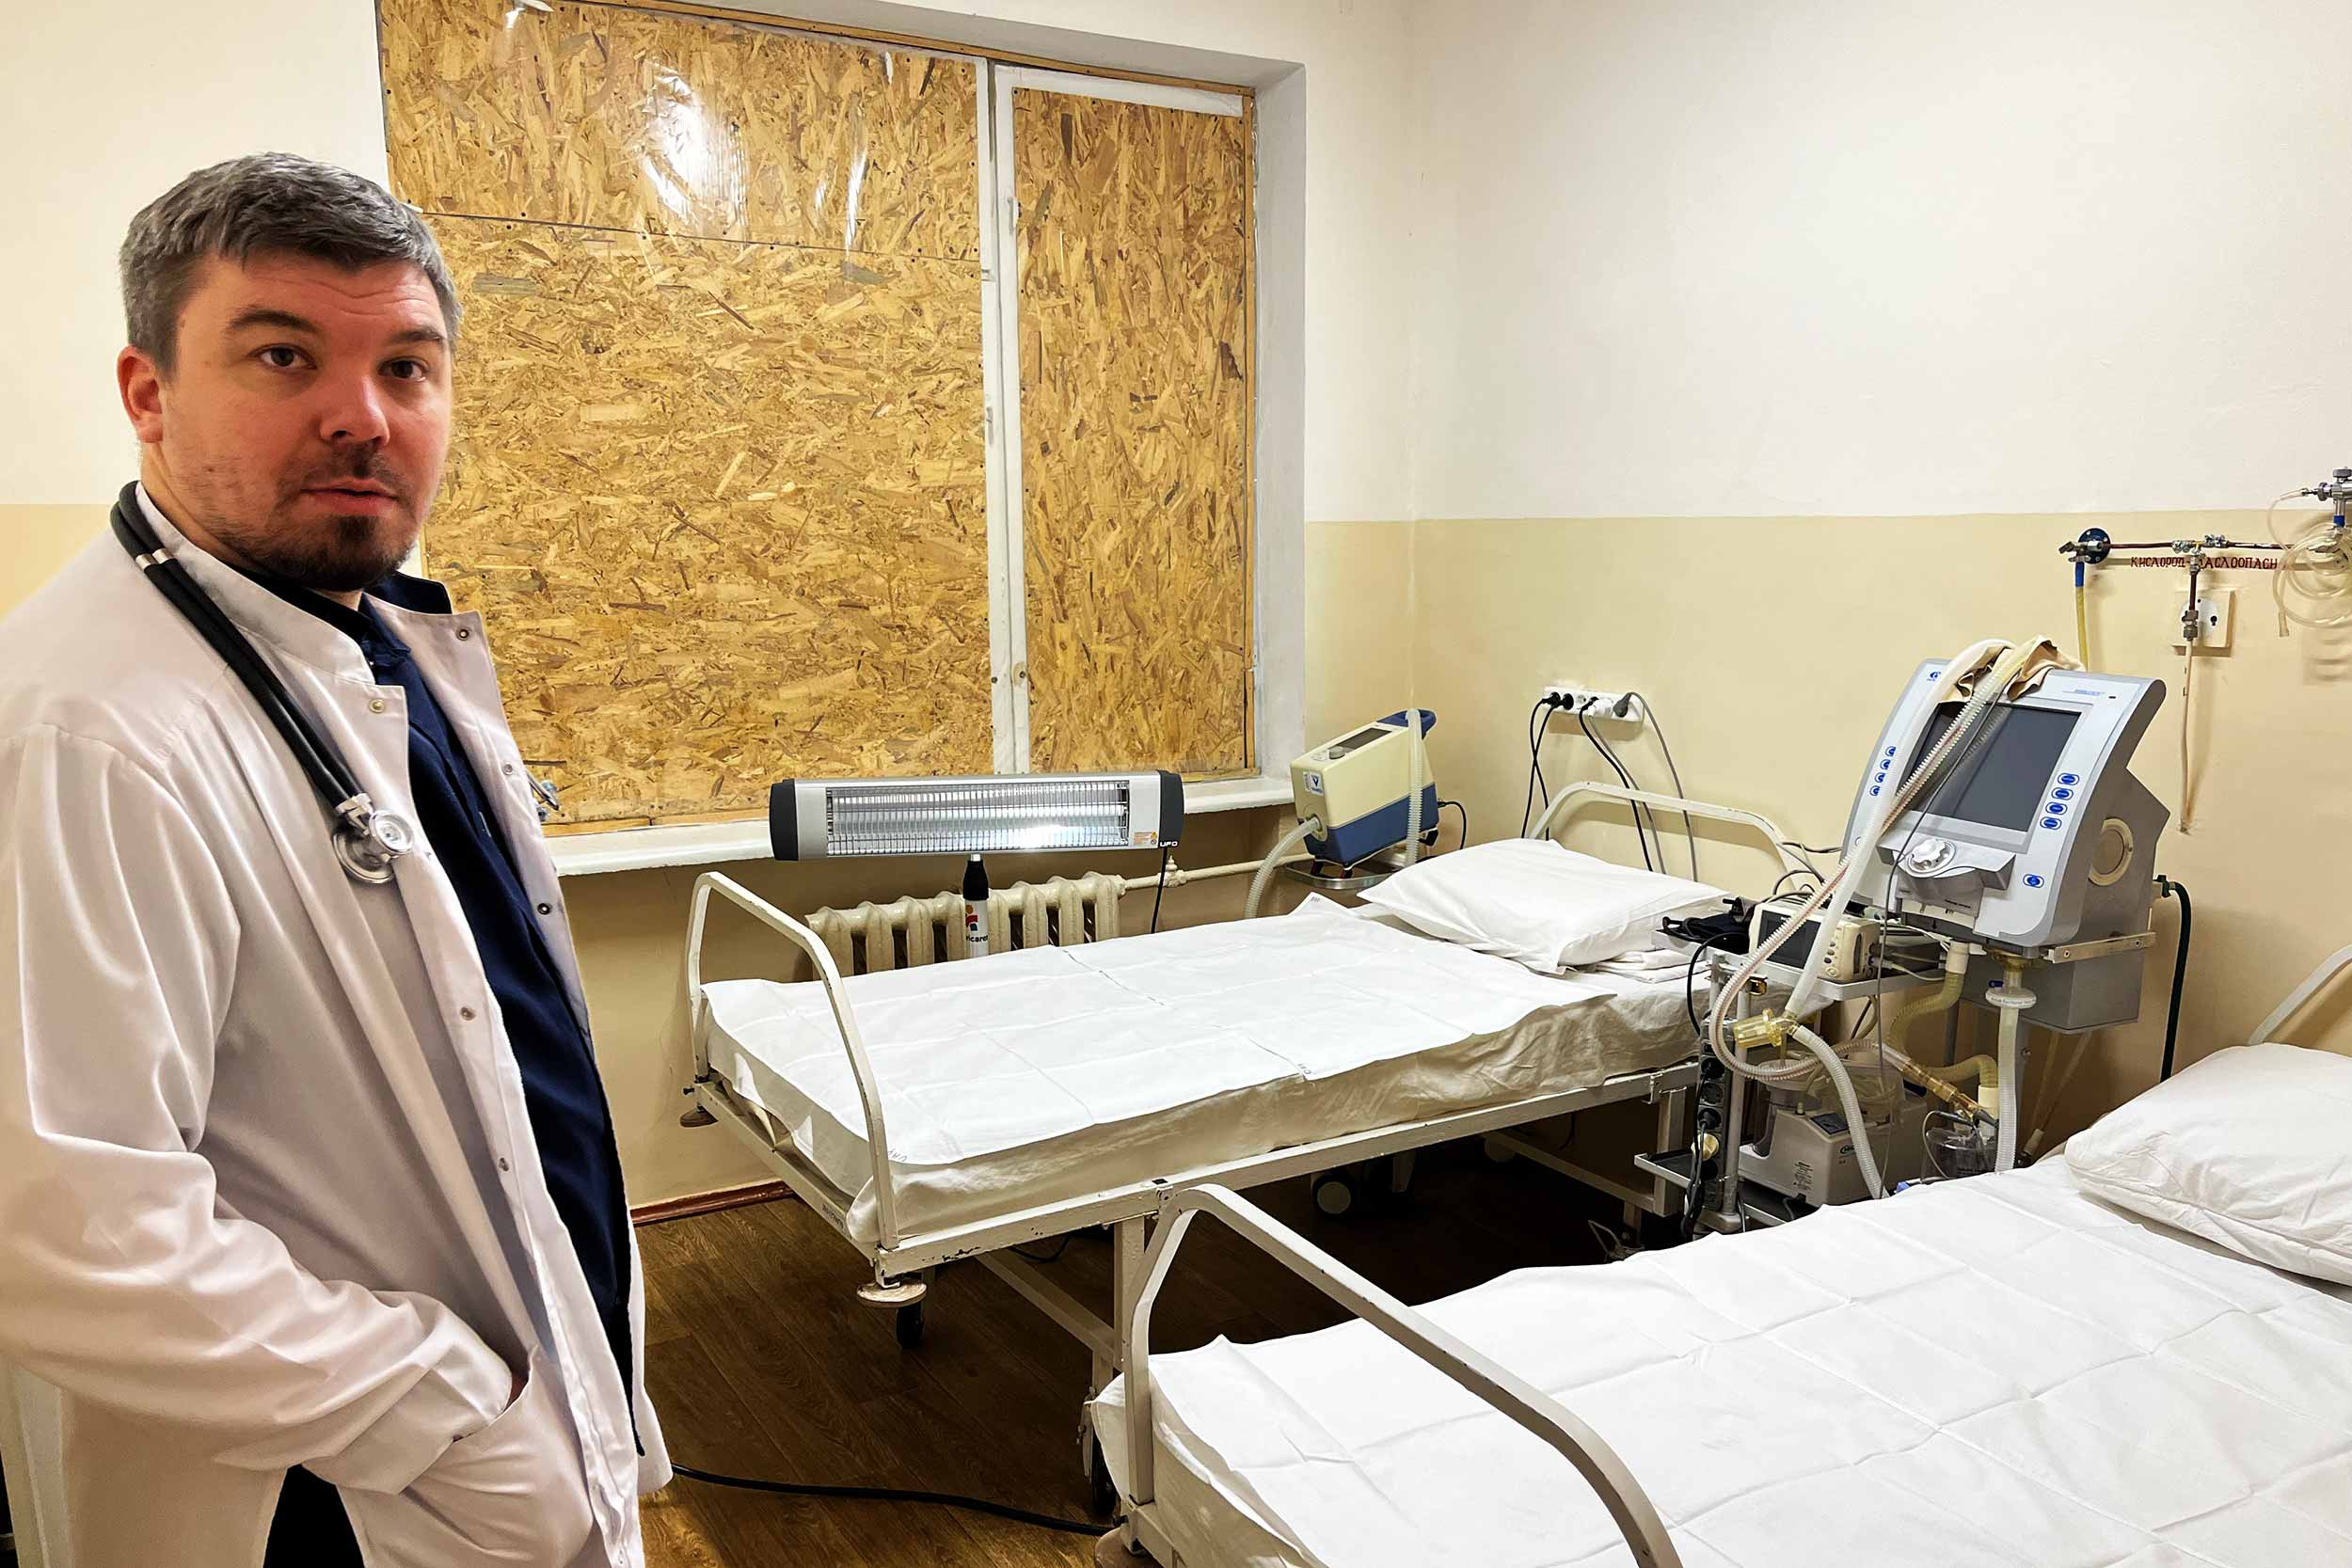 Stanislav Bumbu, a doctor at the Kherson Children's Hospital where on December 31, while a toddler boy was receiving an emergency blood infusion, a shell struck the room just next door. The windows were blown out and are now blocked off. © Anthony Borden/IWPR